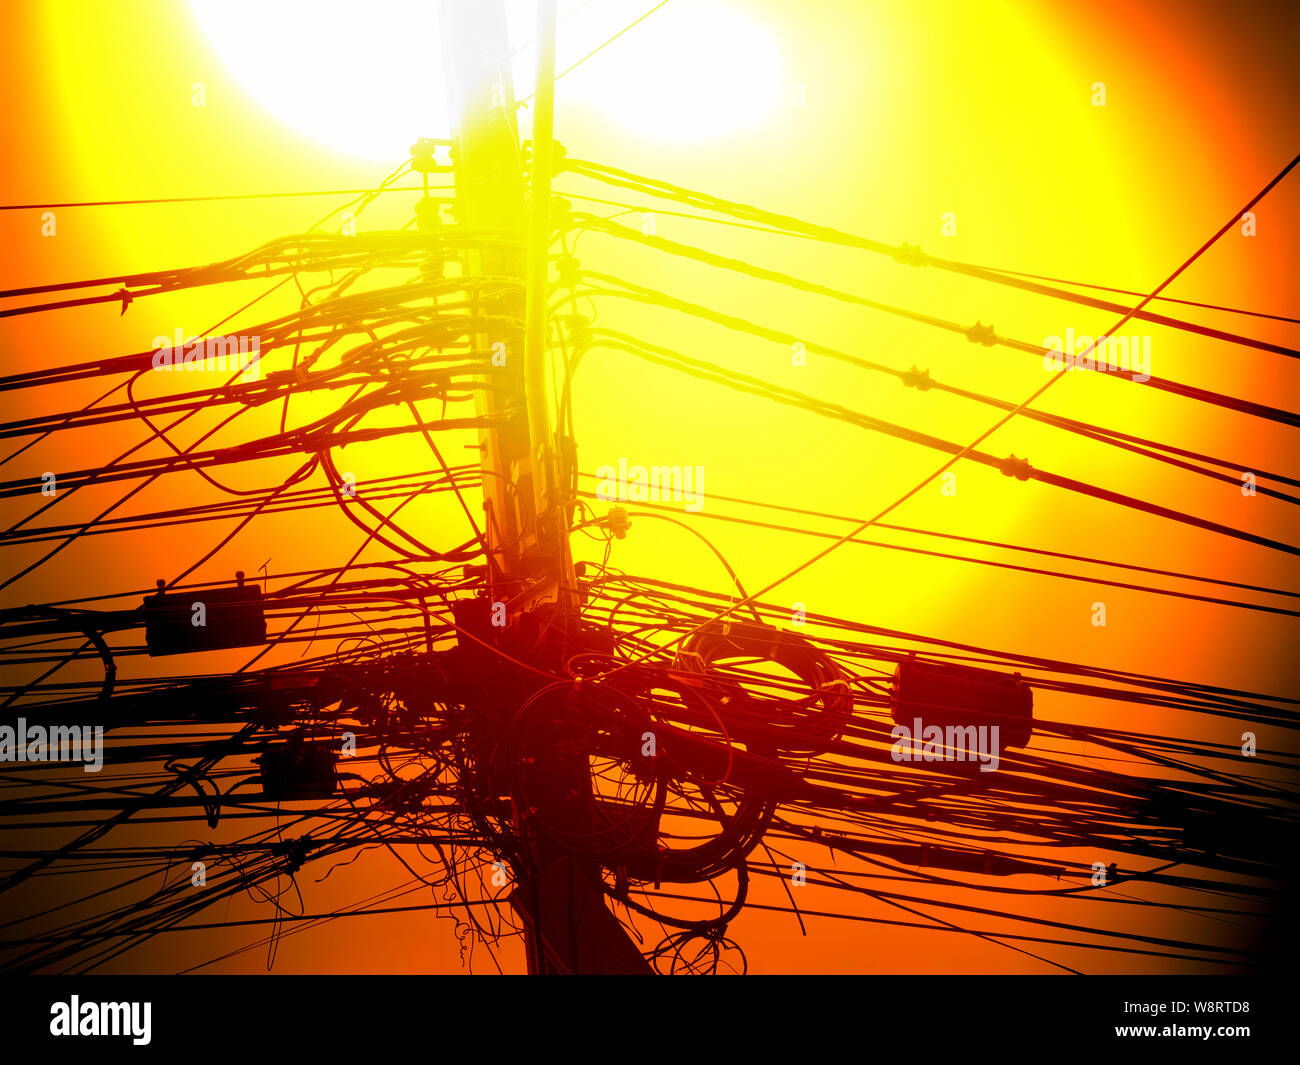 Incredible tangle of electric cables on yellow sky in bangkok thailand, Cables silhouette Stock Photo